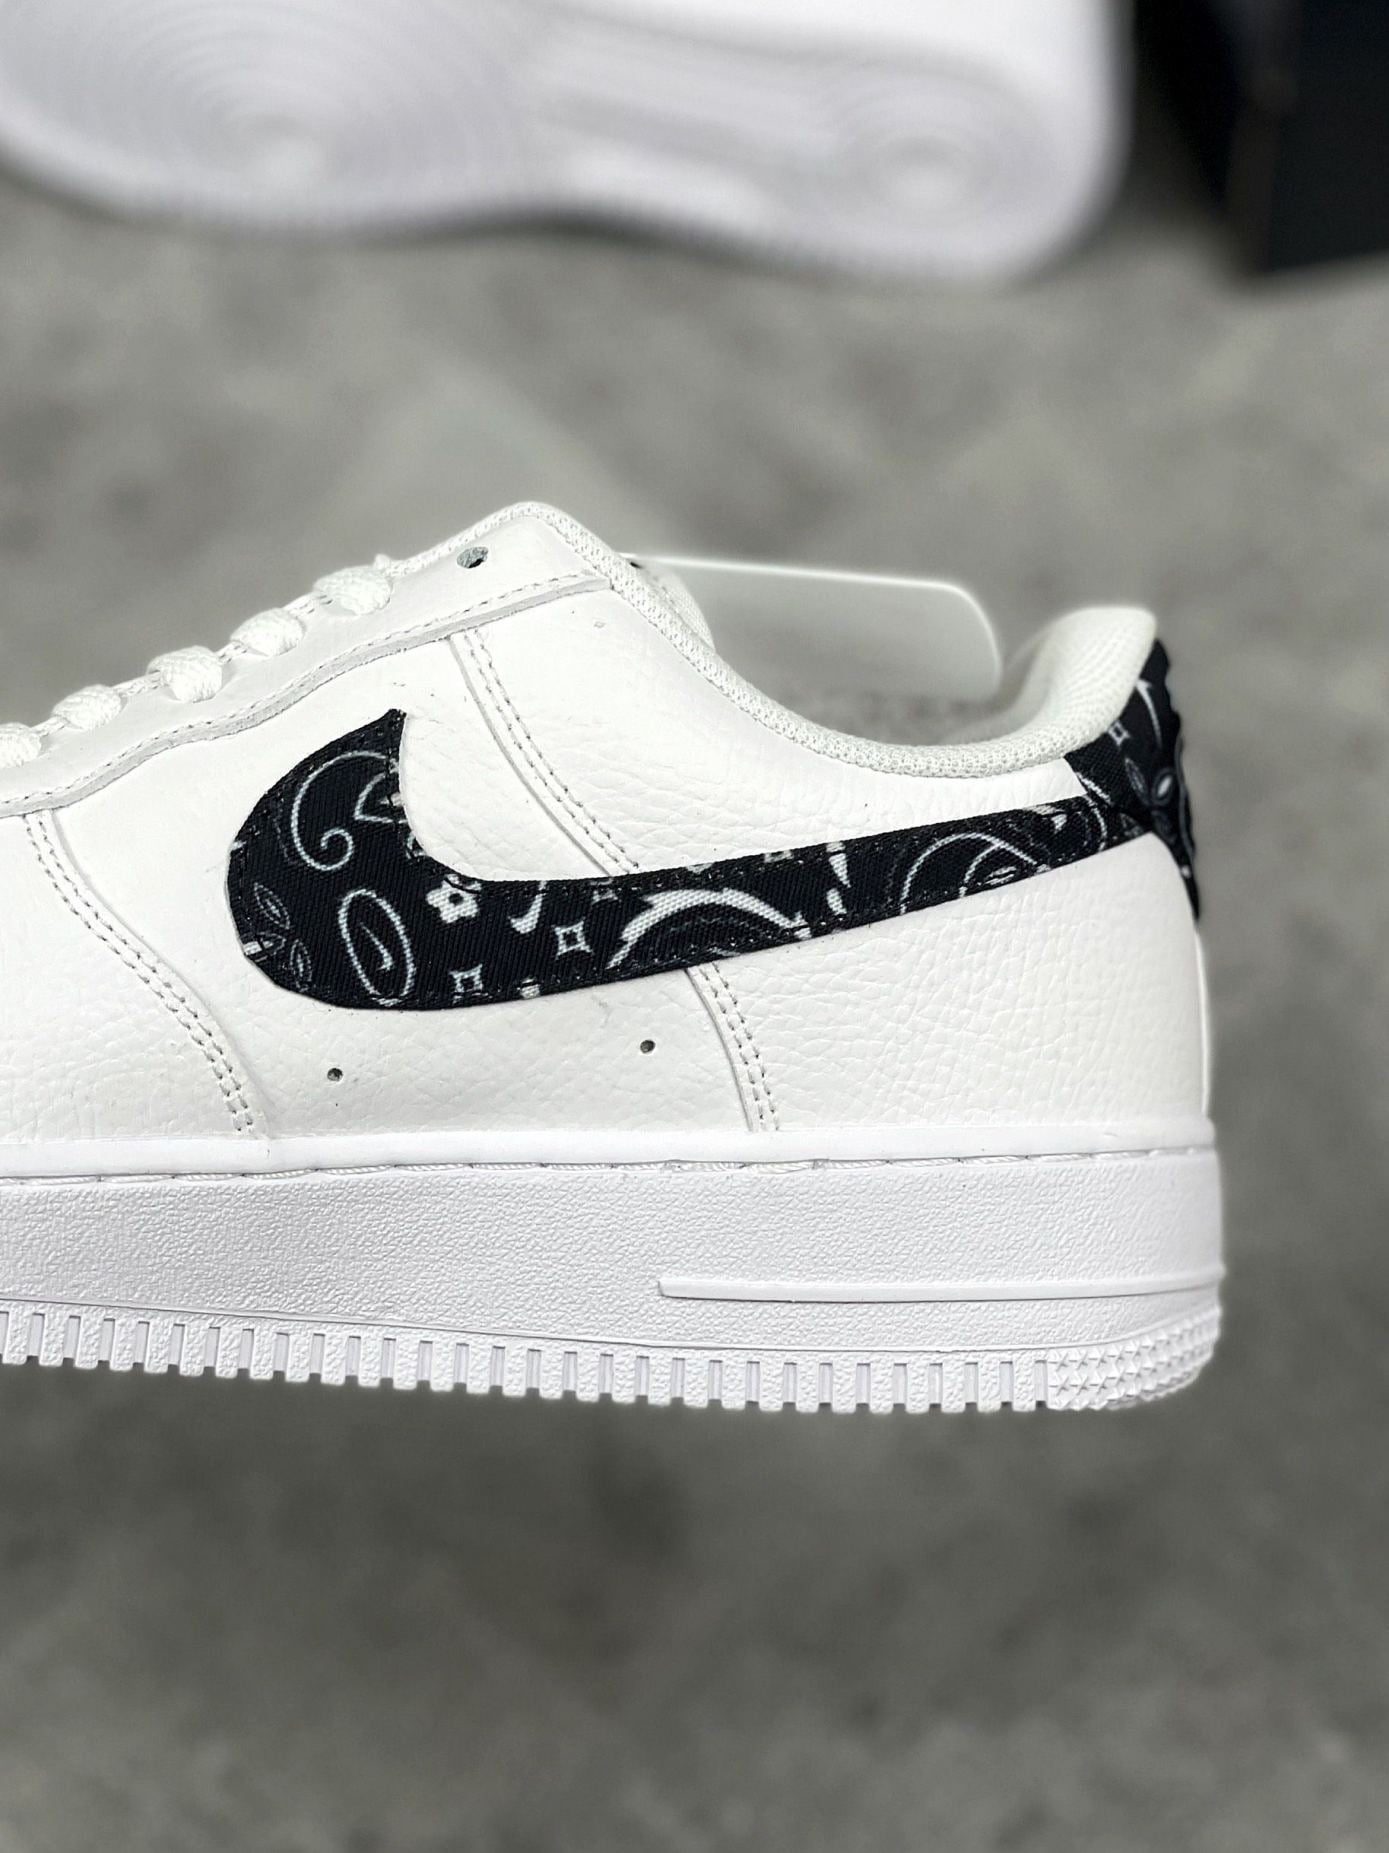 Giày Nike Air Force 1 '07 Essentials 'Black Paisley' Rep 1:1 - Roll Sneaker